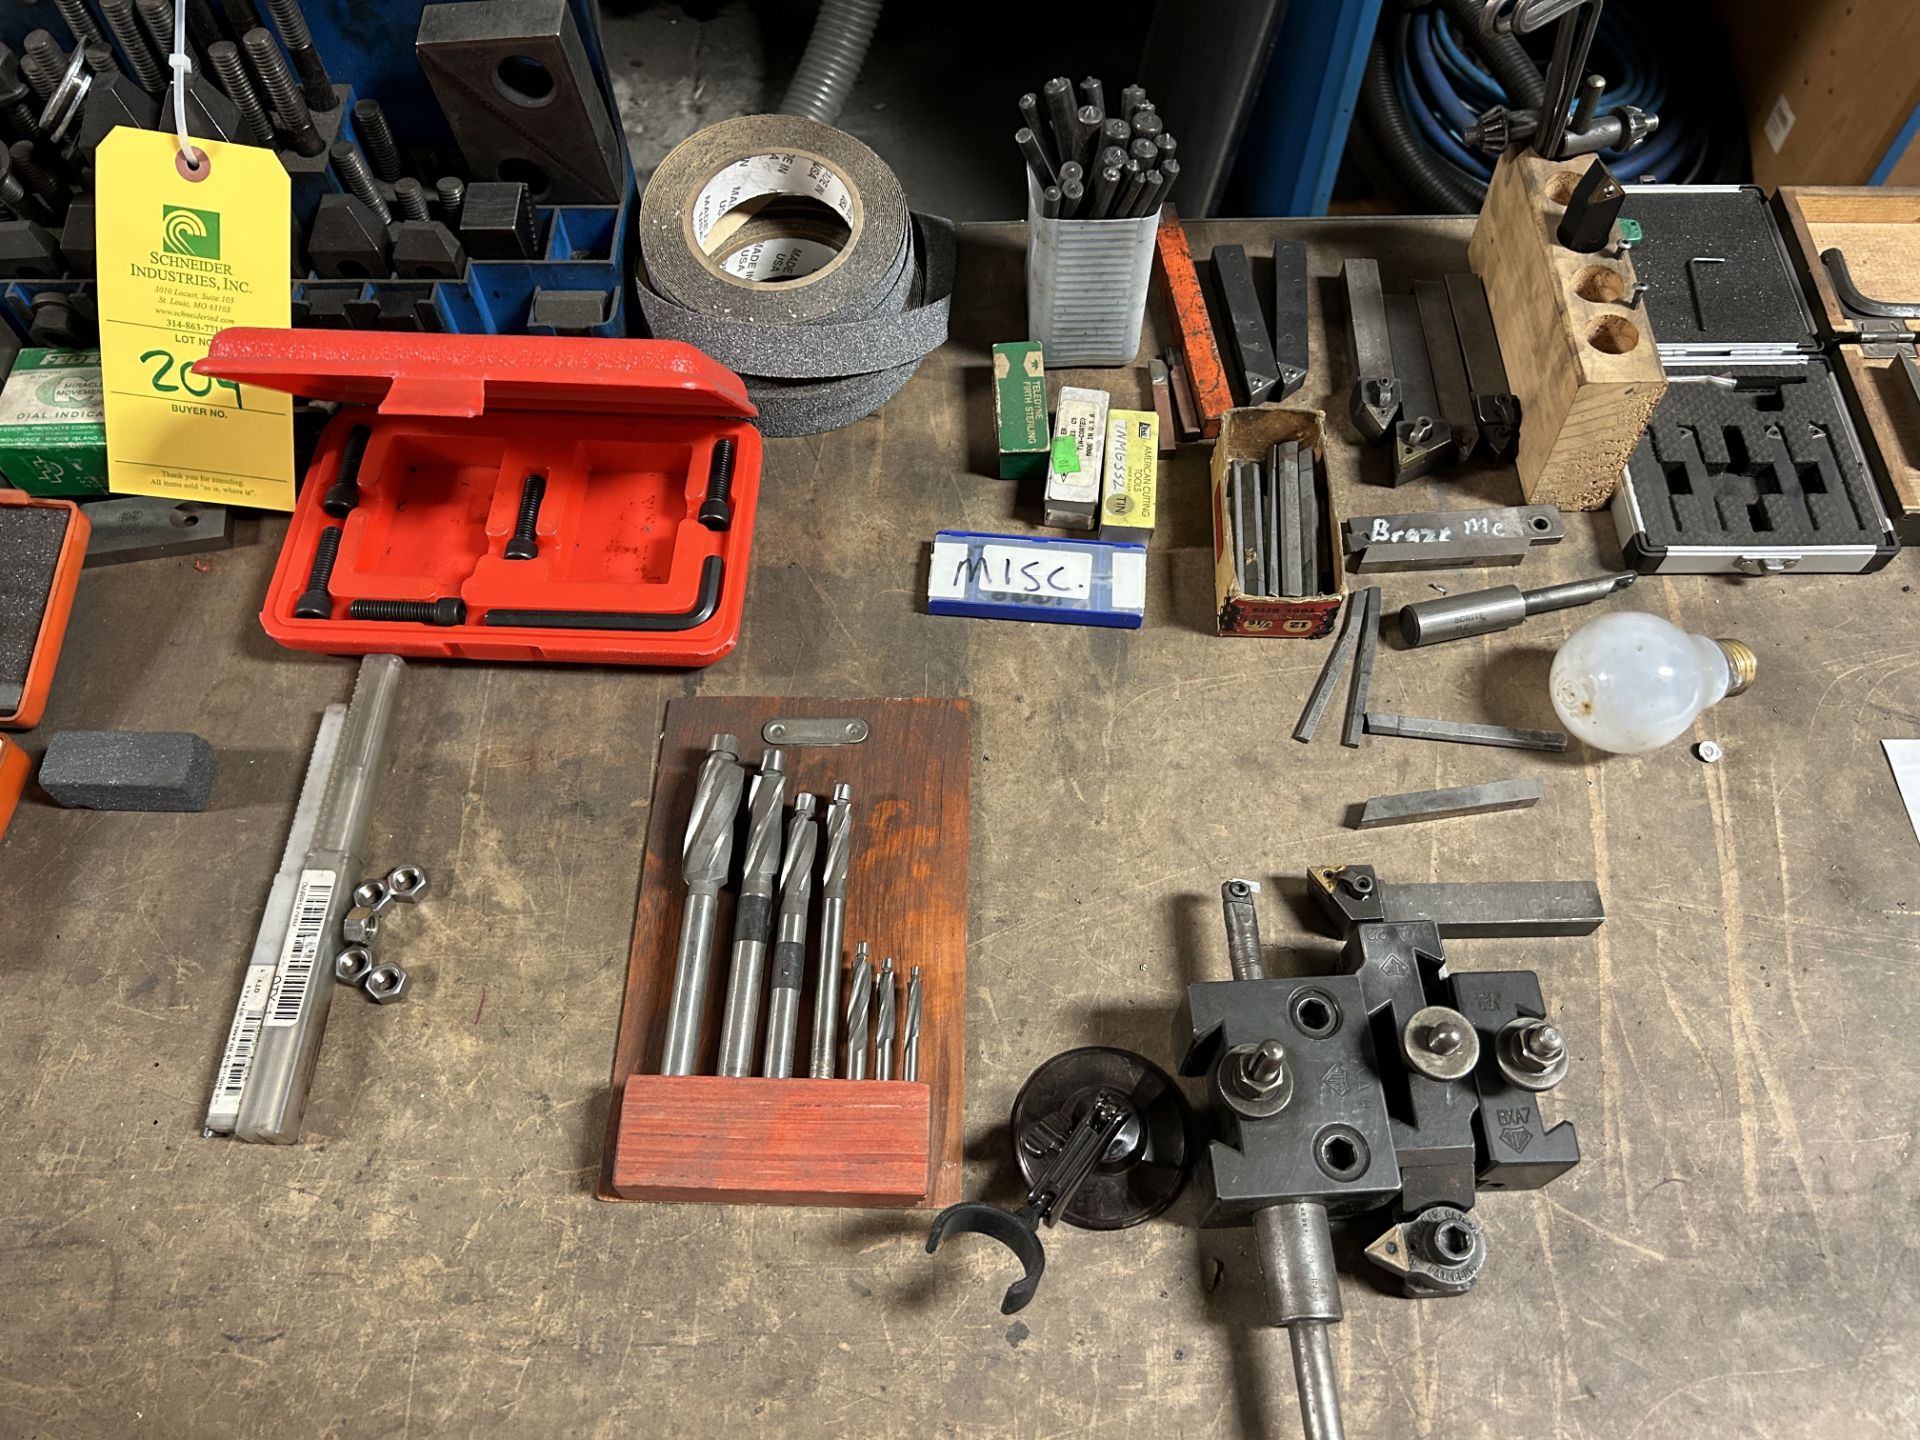 Milling Bits, Hand Tools, Measurement Tools (Does Not Include Table), Rigging/Loading Fee: $30 - Image 3 of 7